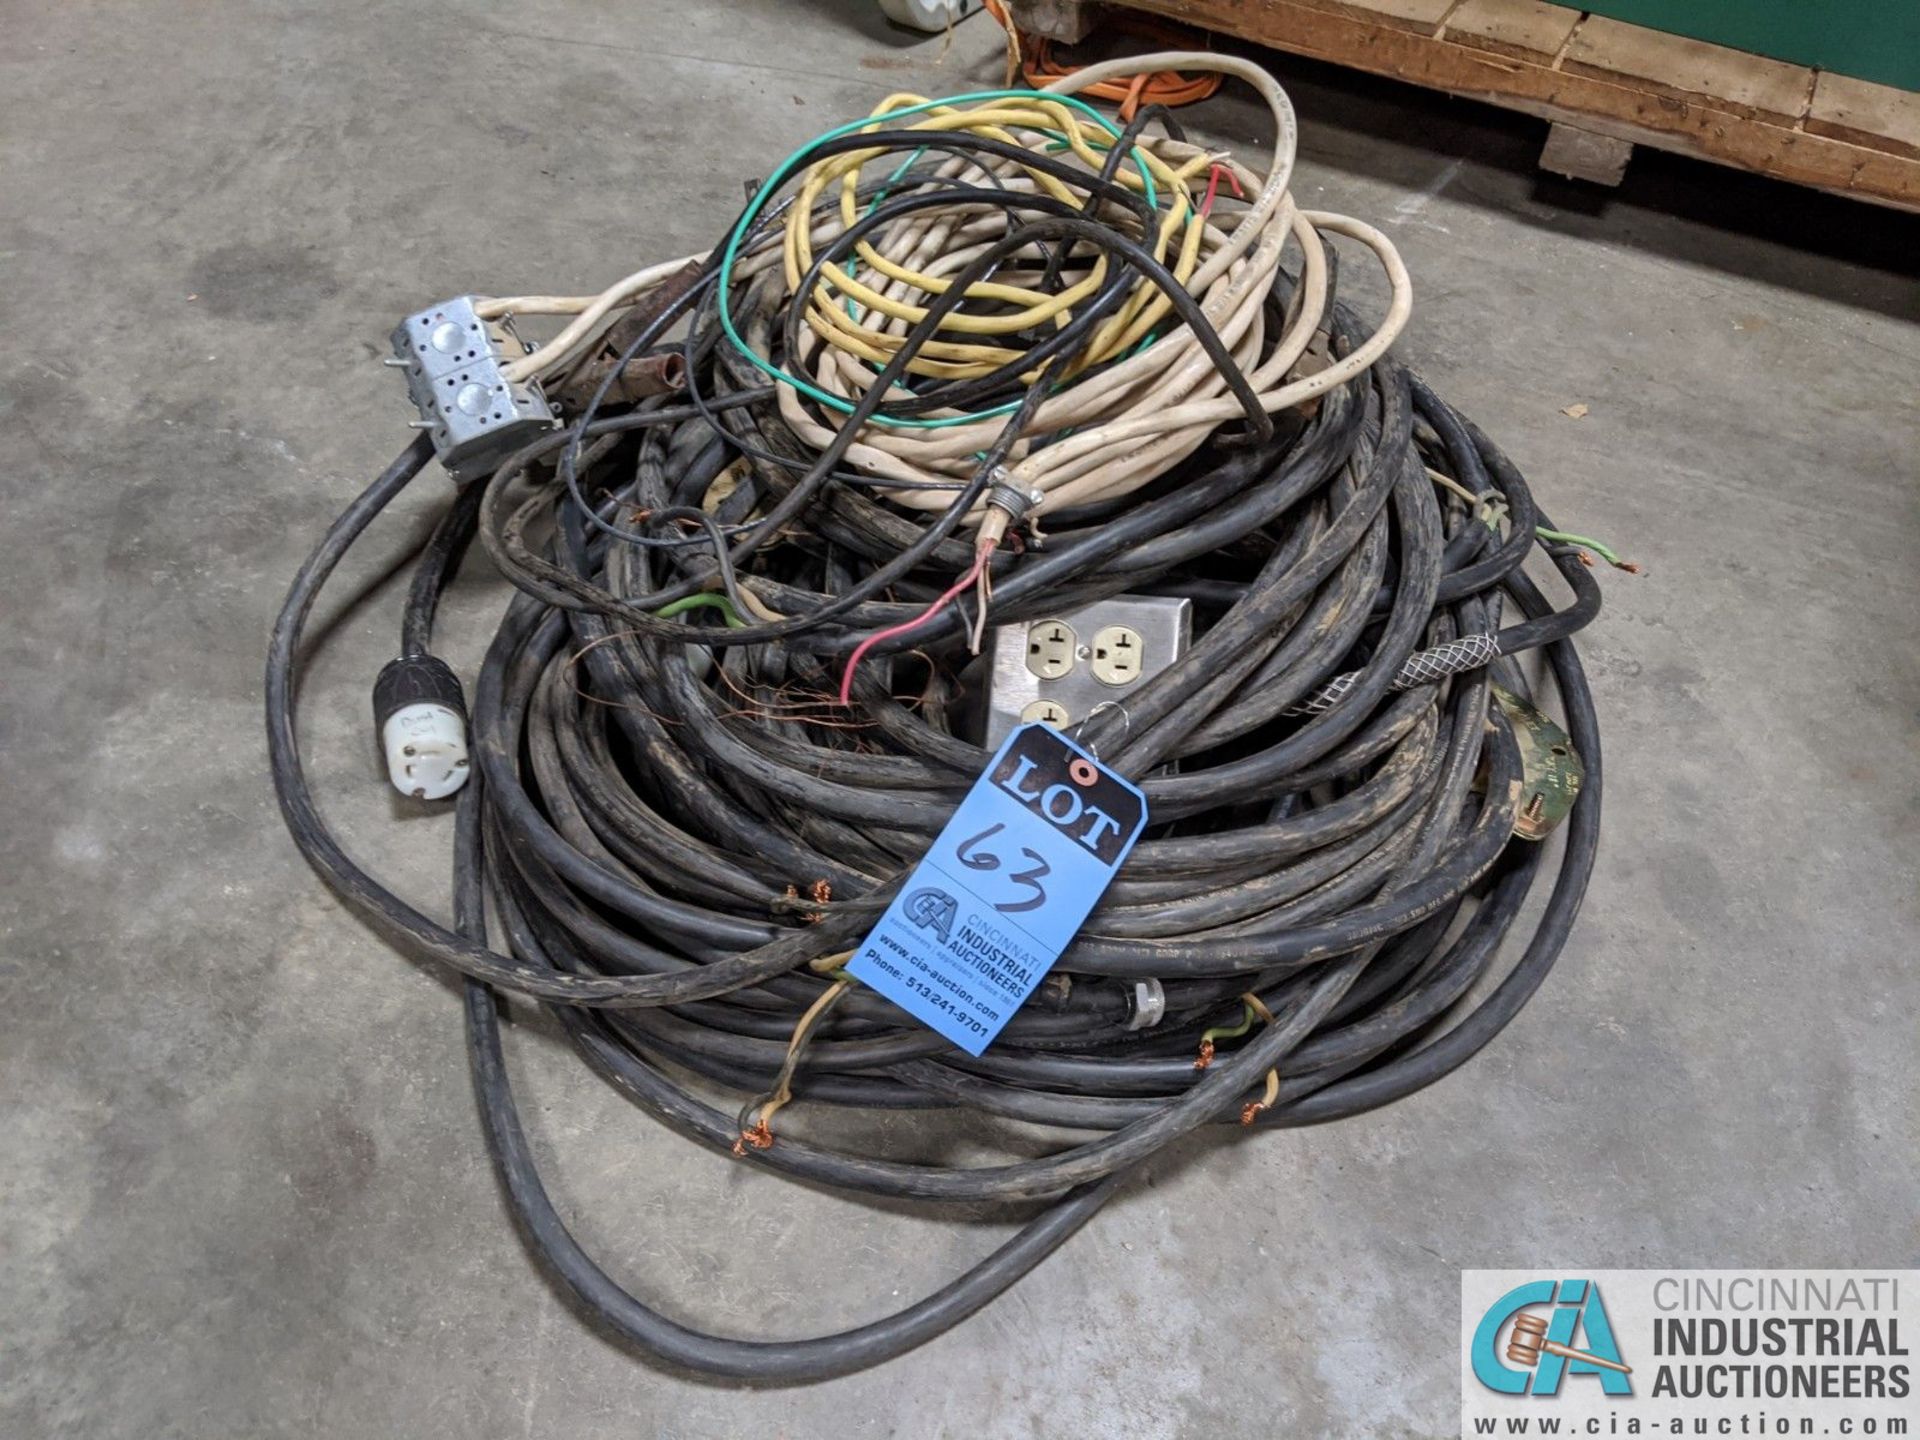 (LOT) H.D. SERVICE WIRE (8635 East Ave., Mentor, OH 44060 - John Magnasum: 440-667-9414)